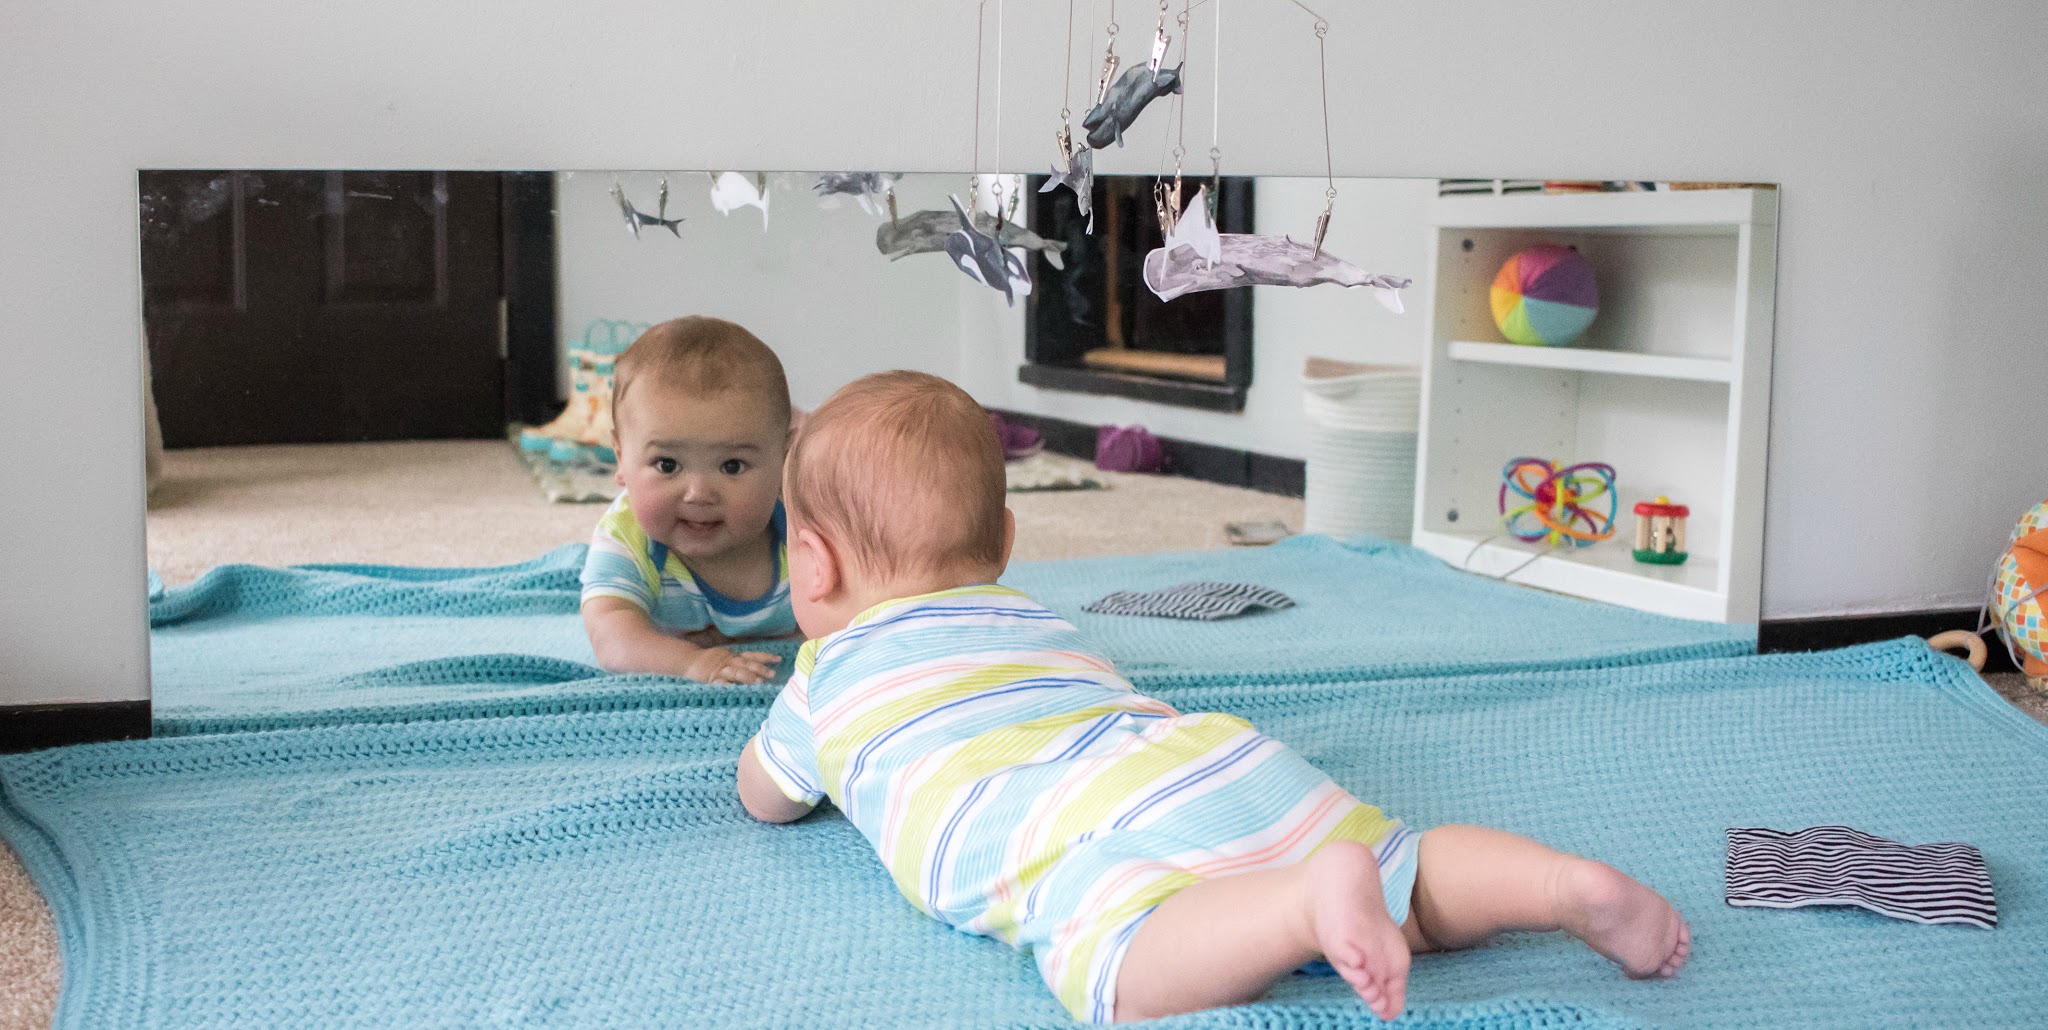 Babies love mirrors, and a long, low mirror is a staple in a Montessori baby environment.